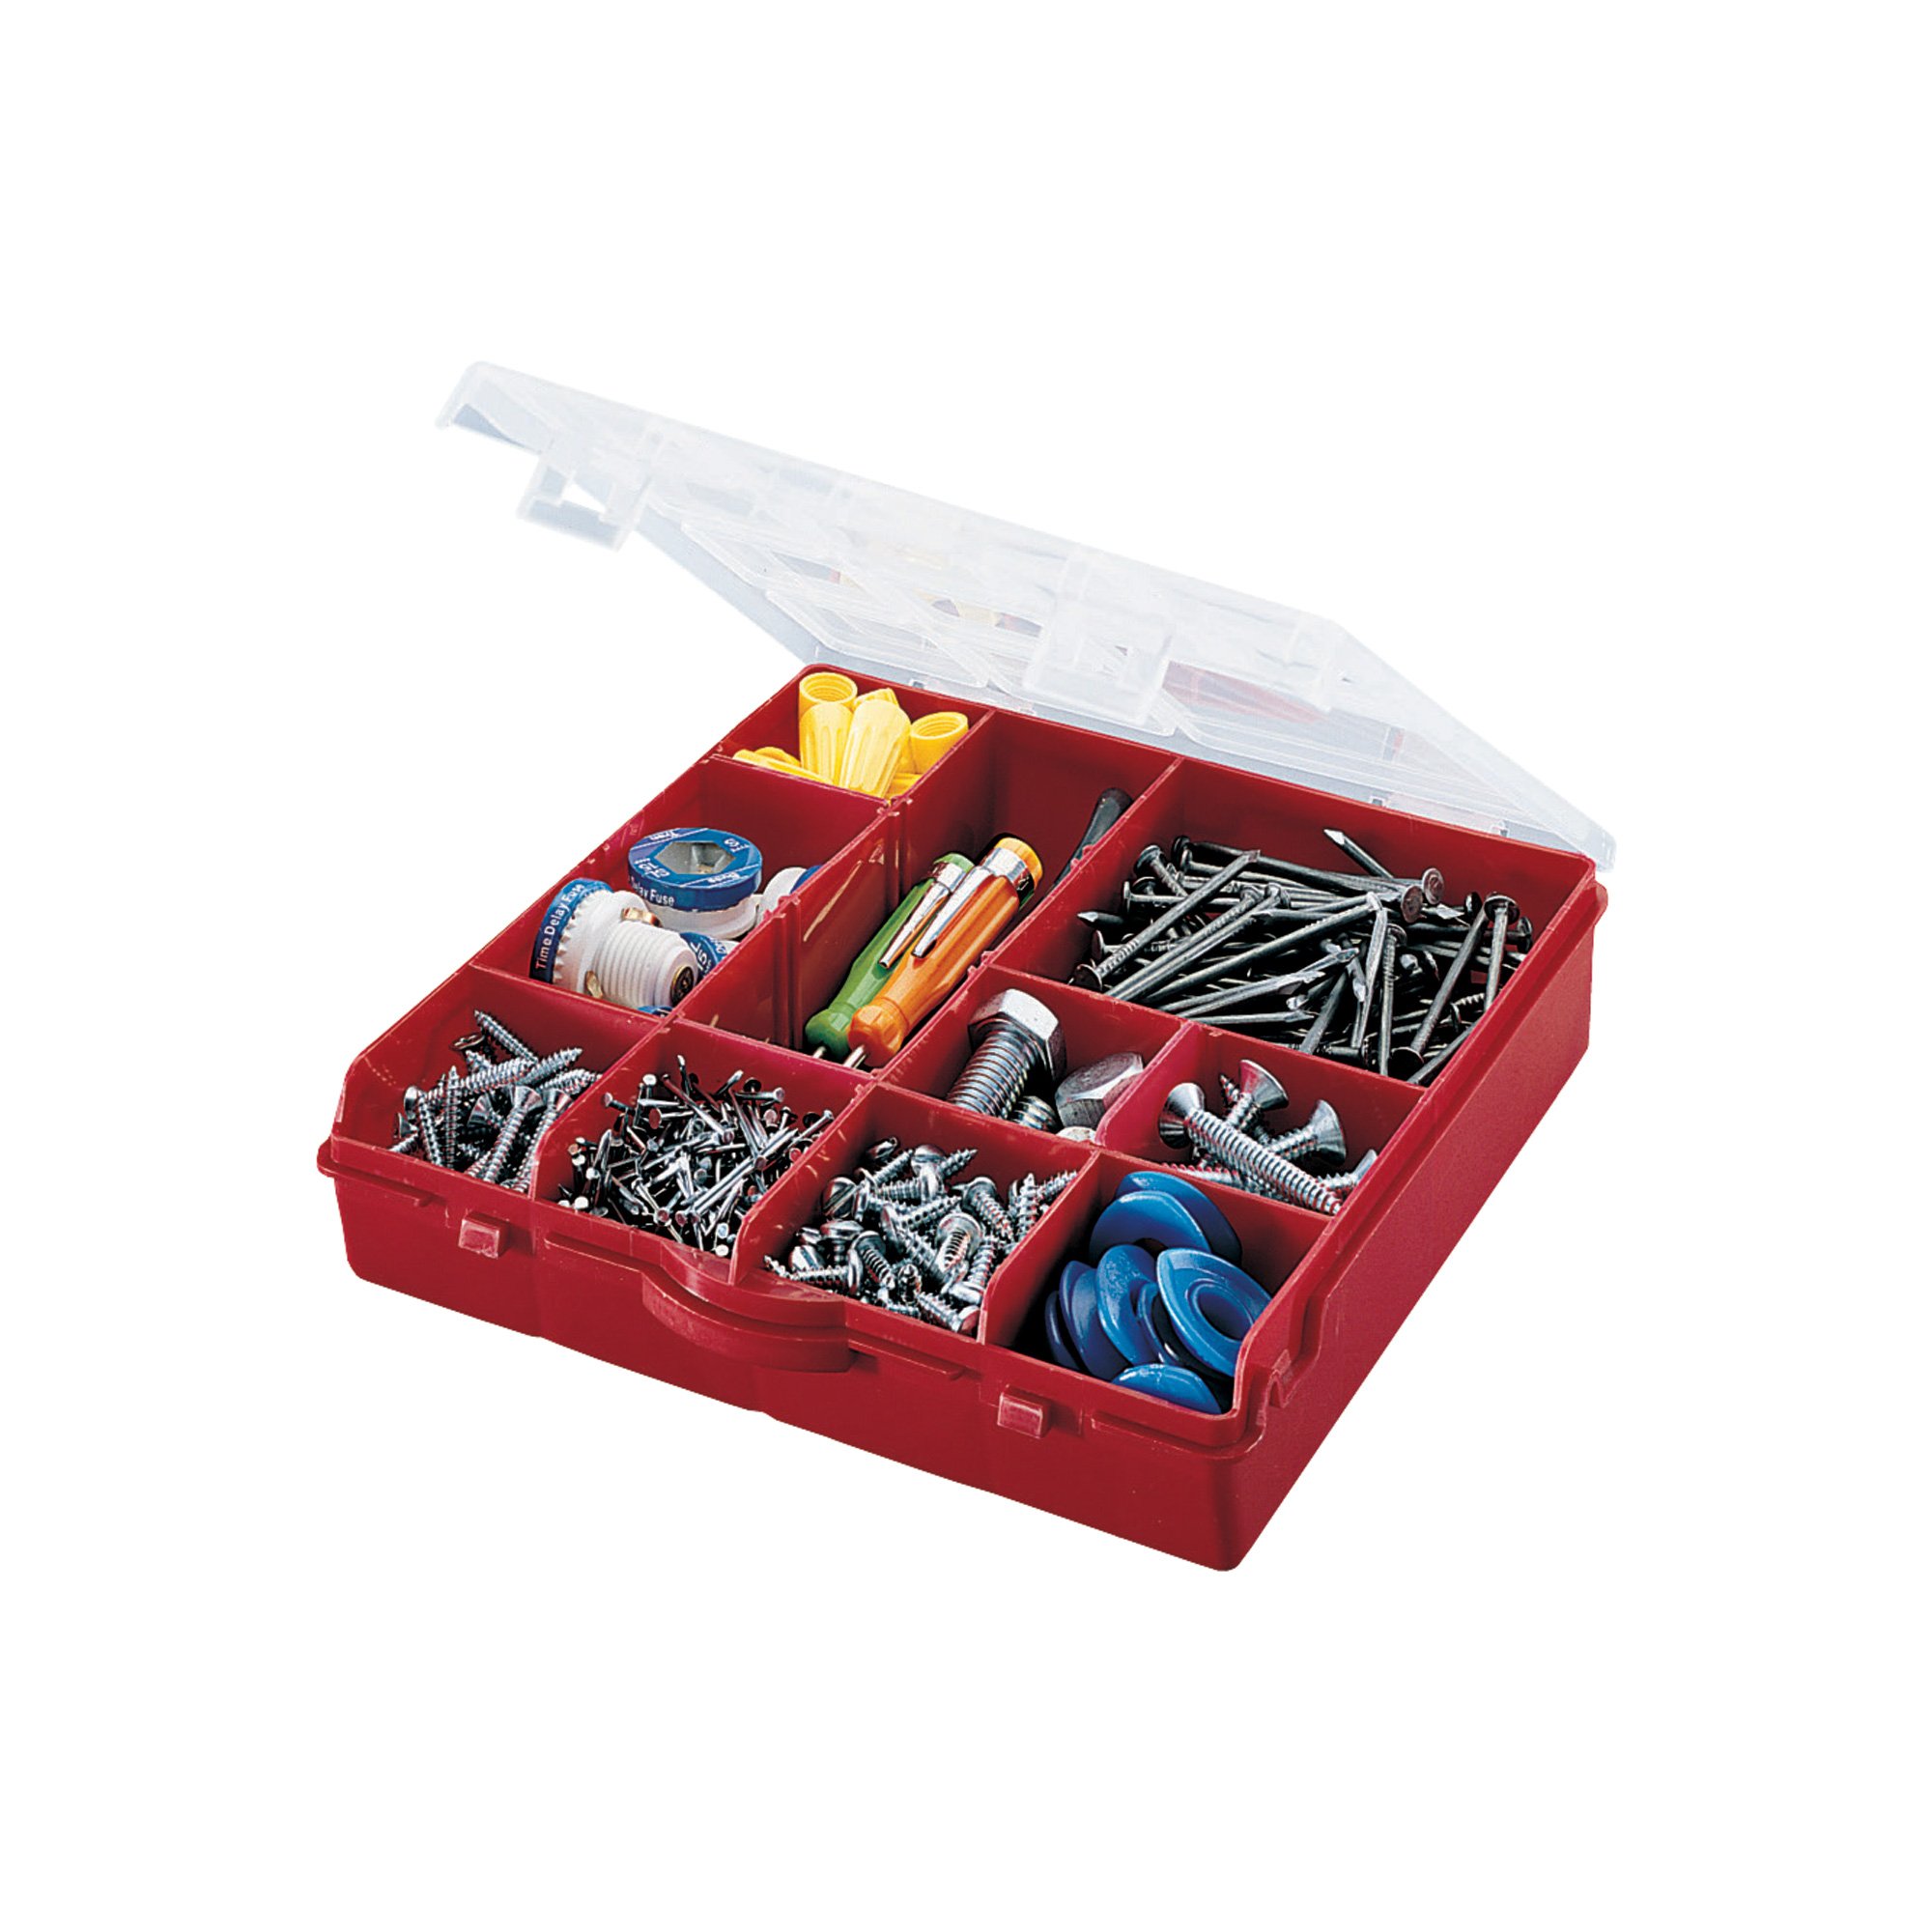 Stack-On Multi-Compartment Storage Box With Removable Dividers